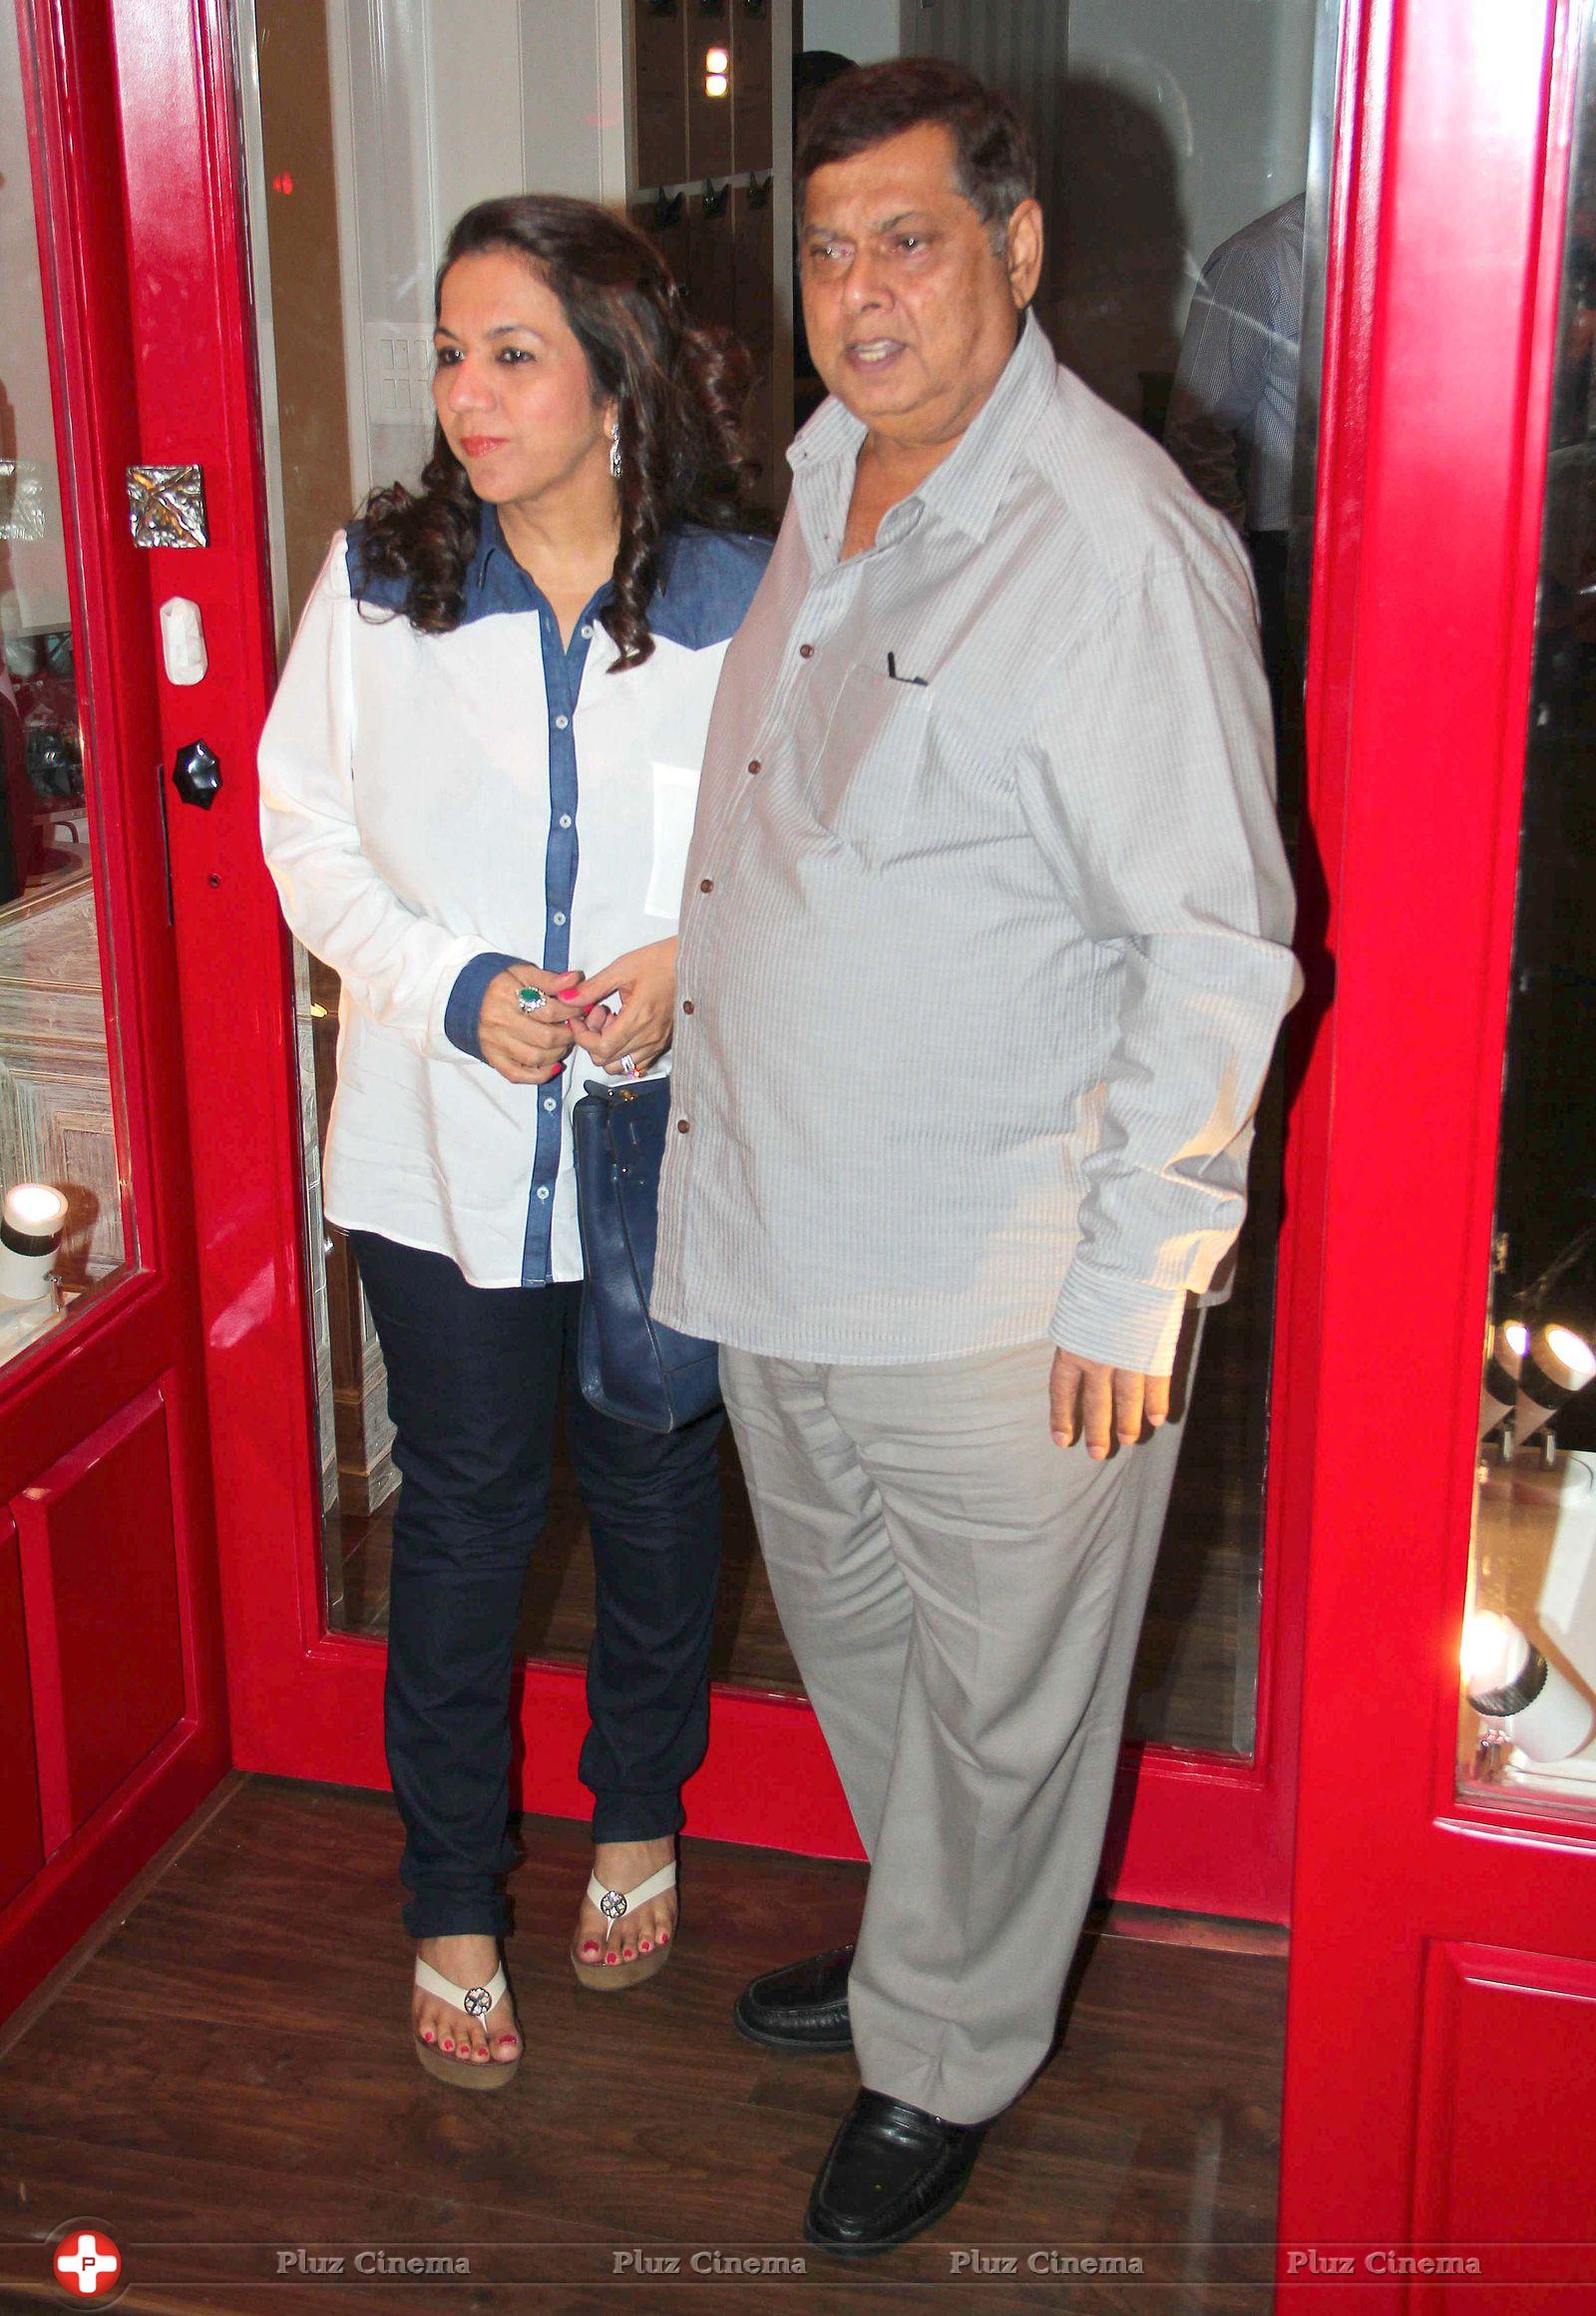 Launch of Bandra 190 luxury boutique Photos | Picture 681731